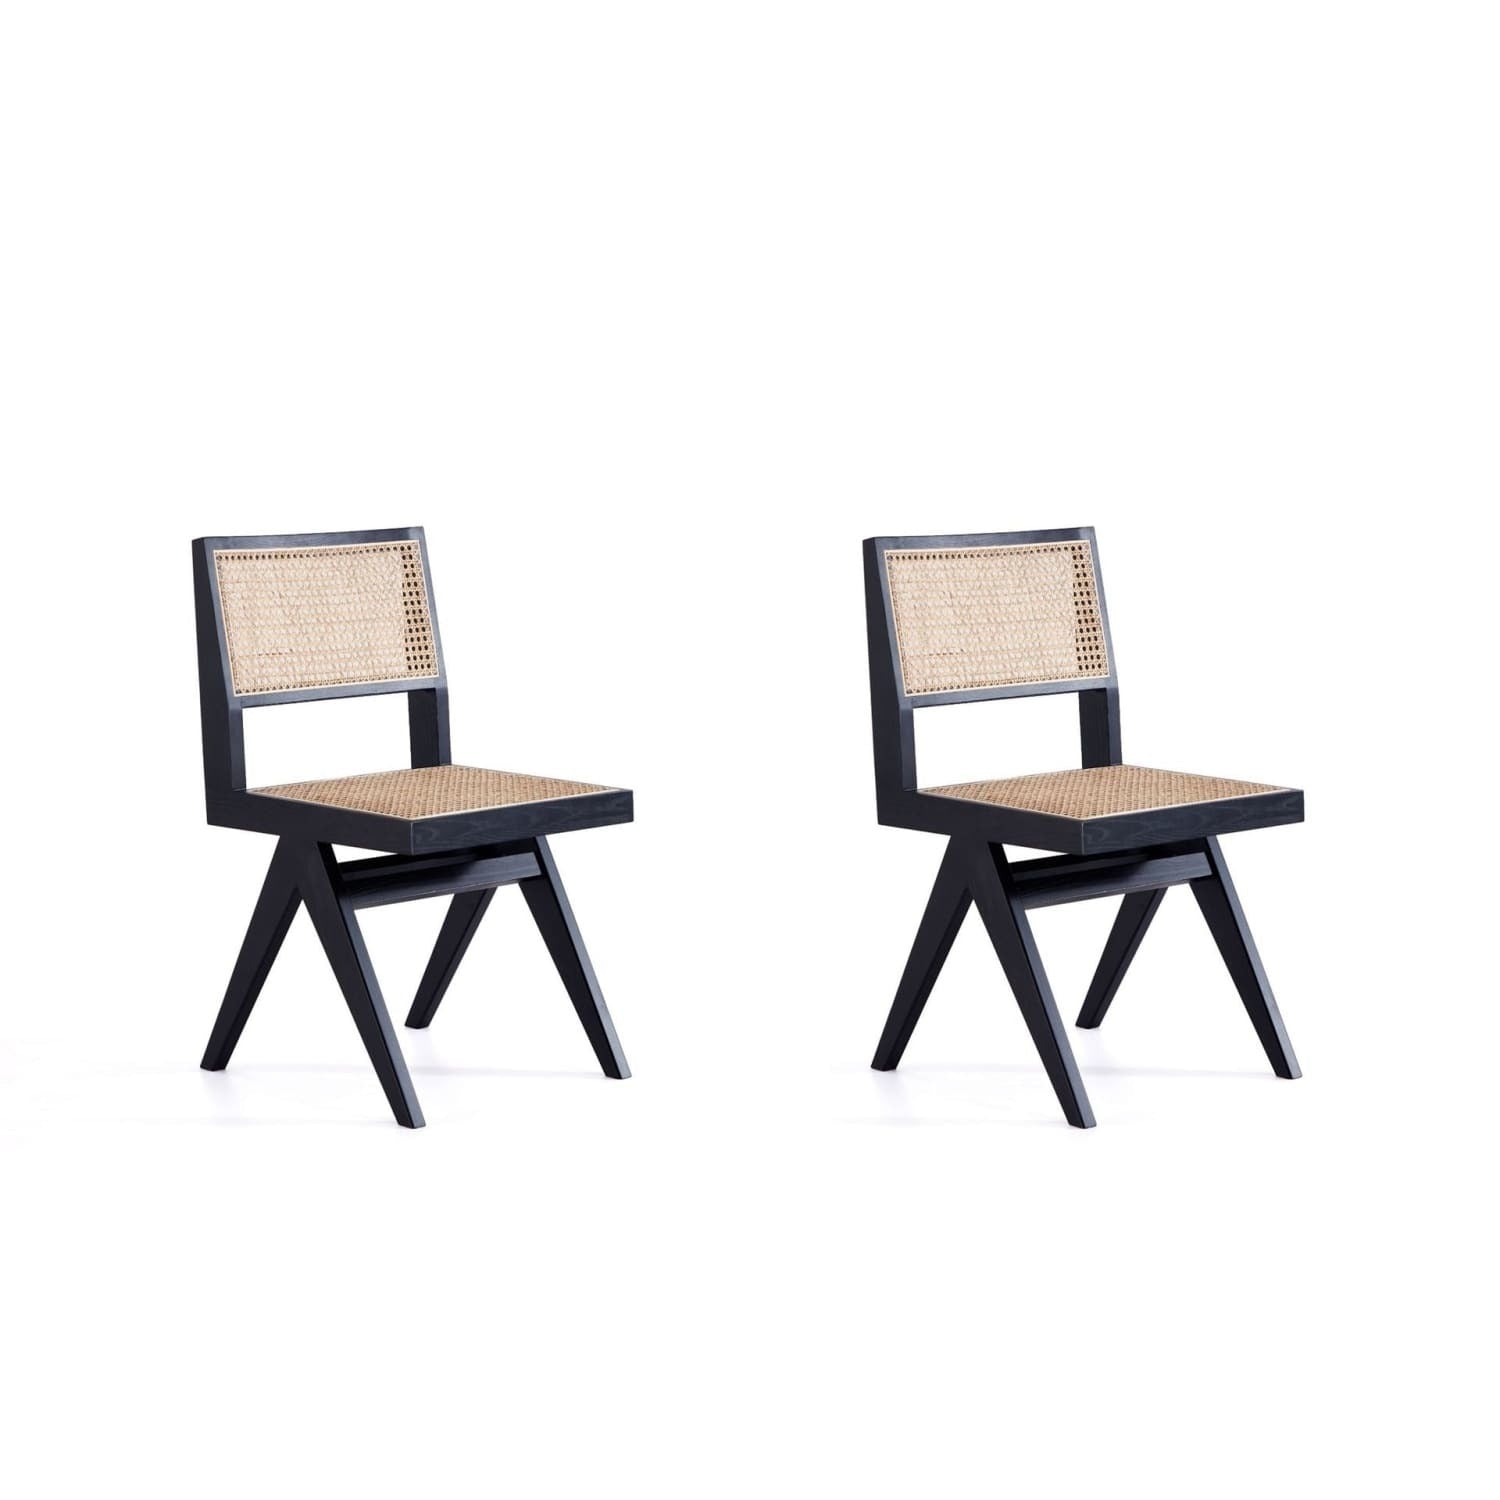 Manhattan Comfort Hamlet Dining Chair in Black and Natural Cane - Set of 2